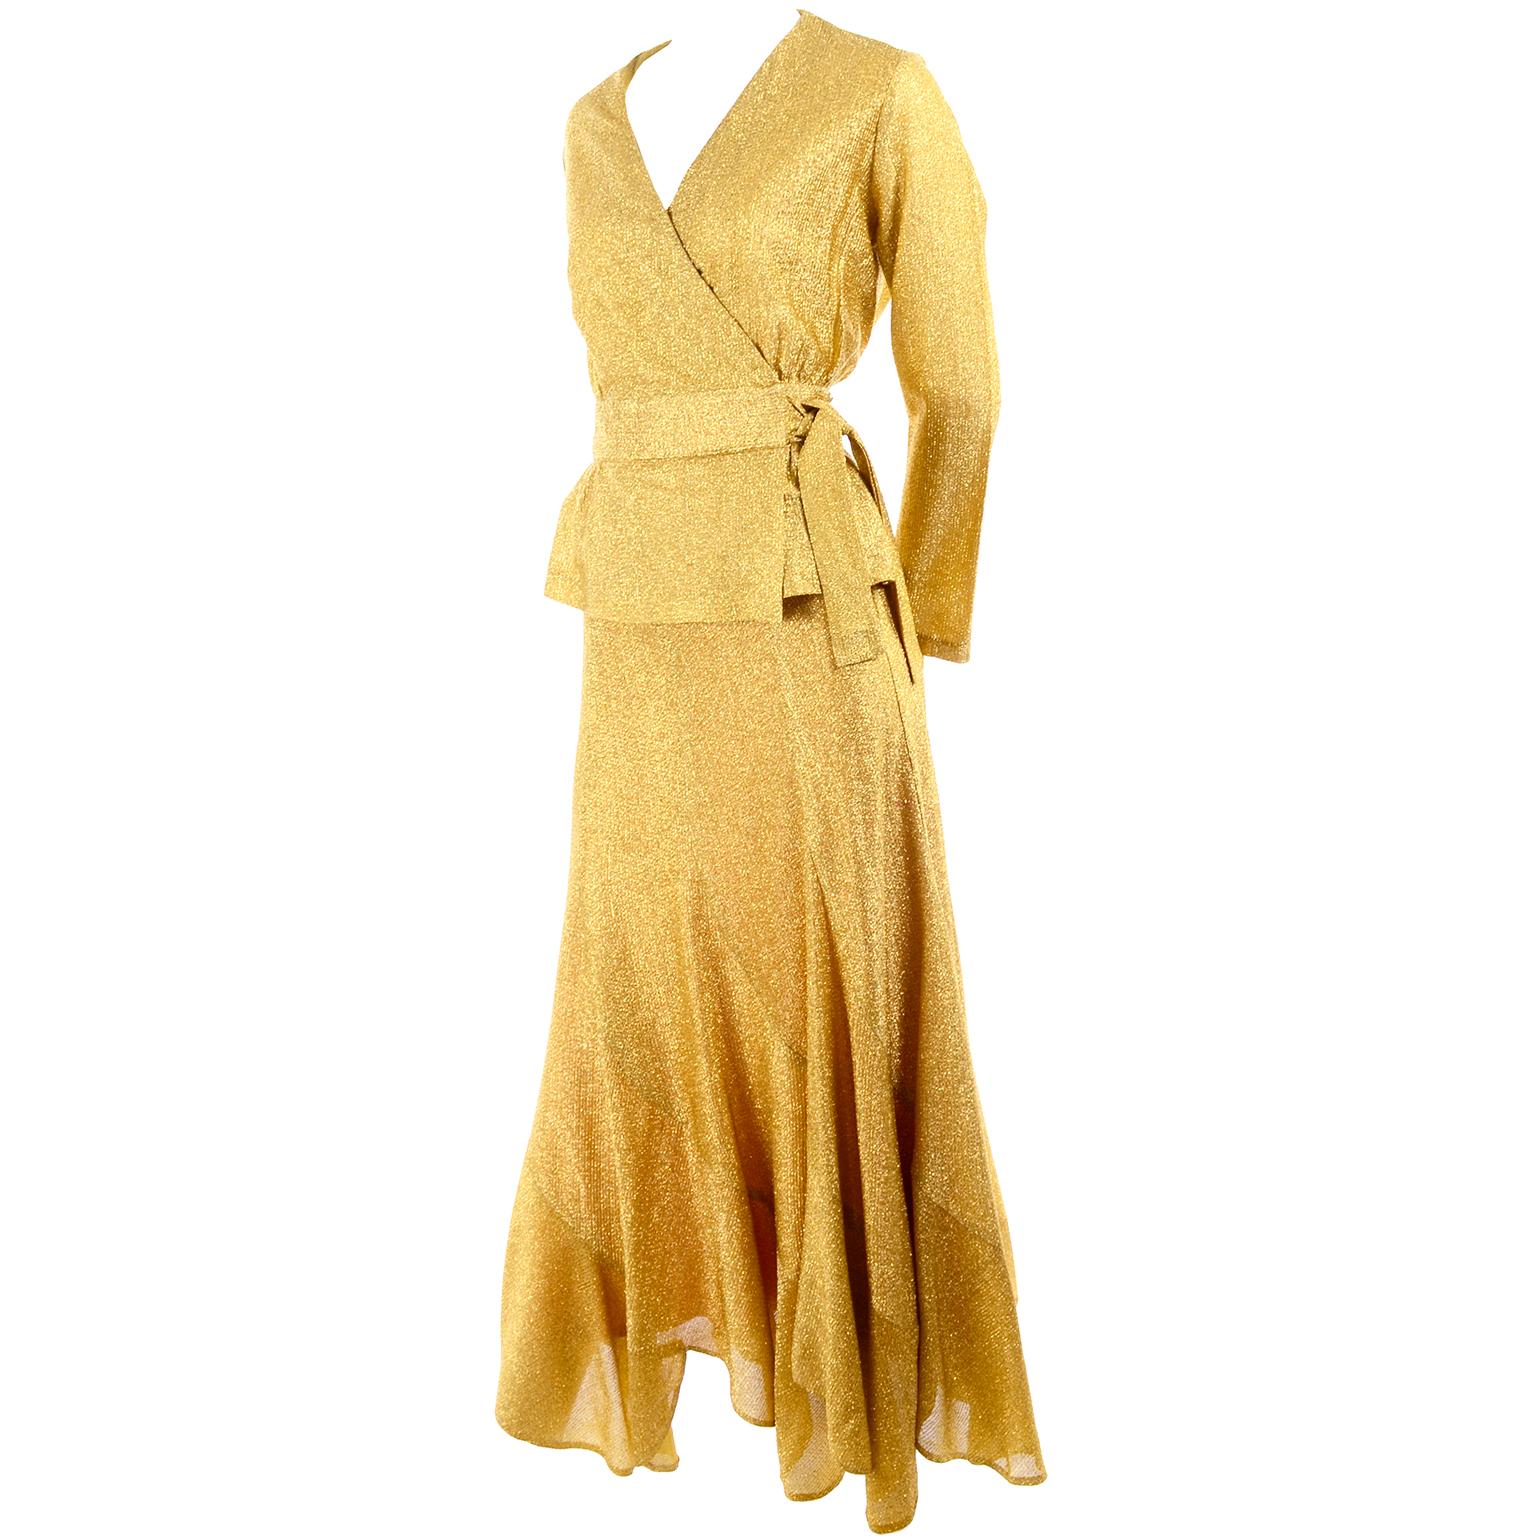 Beverly Paige Gold Lurex Evening Dress 2 pc With Long Bias Cut Skirt, 1970s 2